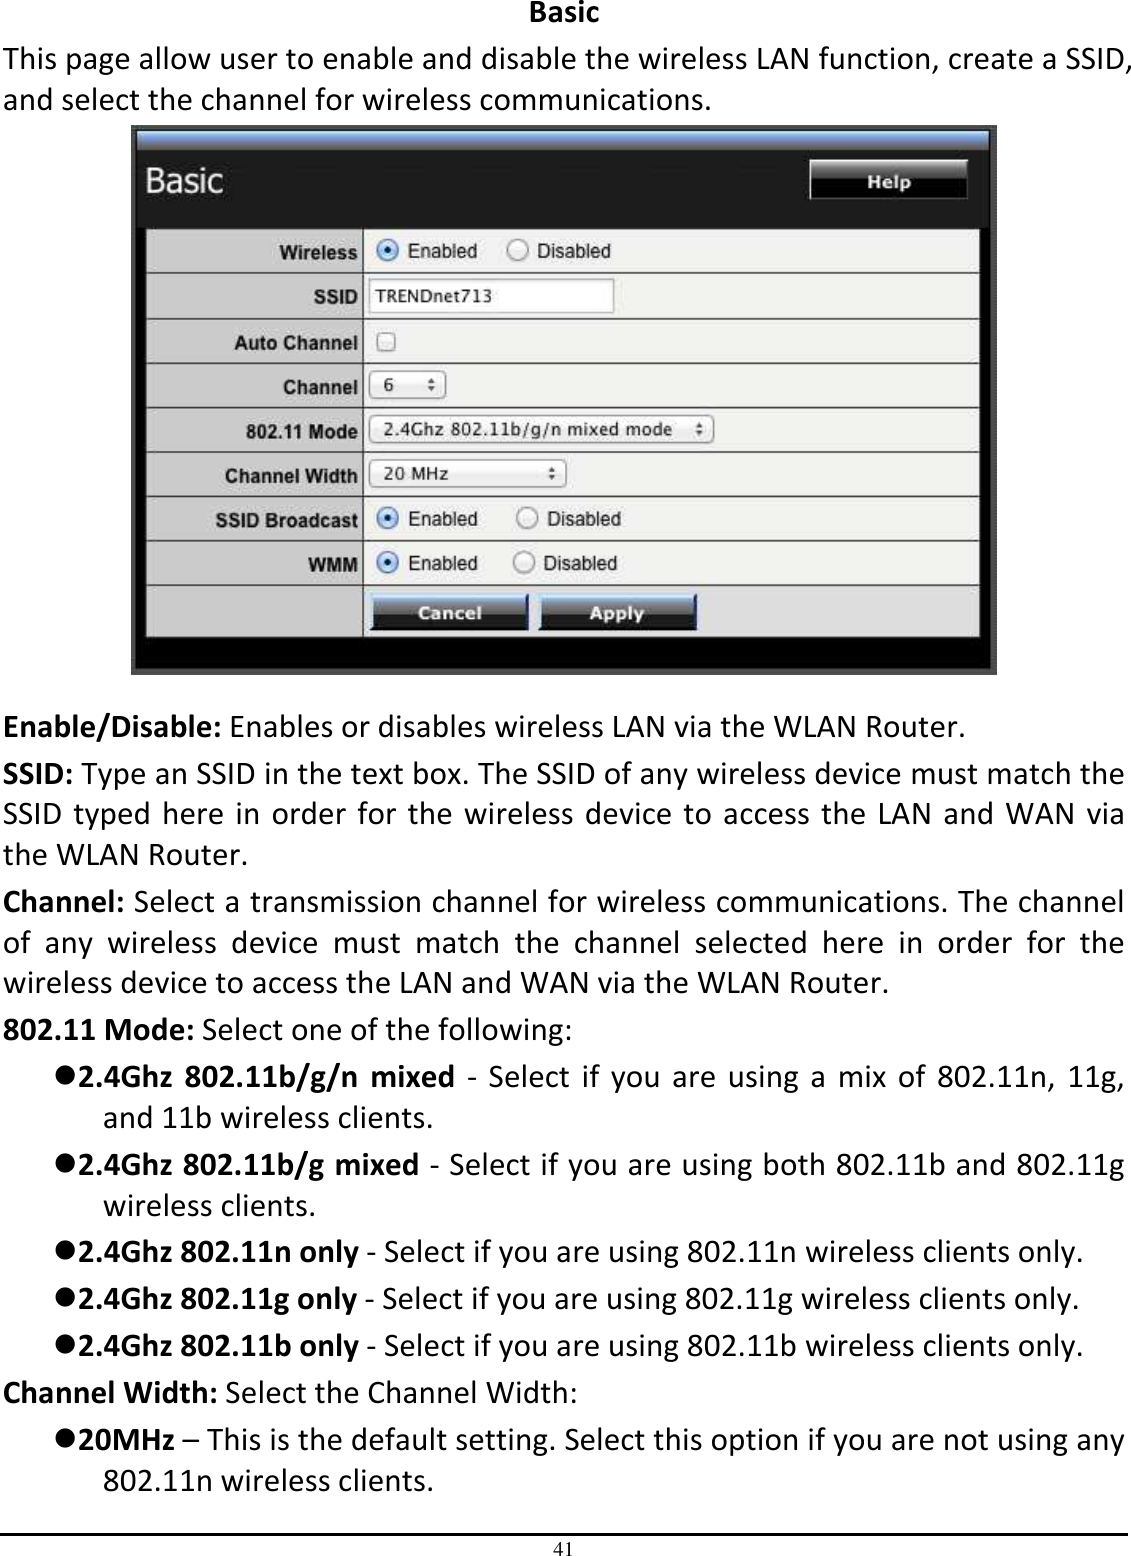 41 Basic This page allow user to enable and disable the wireless LAN function, create a SSID, and select the channel for wireless communications.   Enable/Disable: Enables or disables wireless LAN via the WLAN Router. SSID: Type an SSID in the text box. The SSID of any wireless device must match the SSID typed here in order for the wireless device to access the LAN and WAN via the WLAN Router.  Channel: Select a transmission channel for wireless communications. The channel of  any  wireless  device  must  match  the  channel  selected  here  in  order  for  the wireless device to access the LAN and WAN via the WLAN Router. 802.11 Mode: Select one of the following: 2.4Ghz  802.11b/g/n  mixed  - Select  if you are using a mix of  802.11n, 11g, and 11b wireless clients. 2.4Ghz 802.11b/g mixed - Select if you are using both 802.11b and 802.11g wireless clients. 2.4Ghz 802.11n only - Select if you are using 802.11n wireless clients only. 2.4Ghz 802.11g only - Select if you are using 802.11g wireless clients only. 2.4Ghz 802.11b only - Select if you are using 802.11b wireless clients only. Channel Width: Select the Channel Width: 20MHz – This is the default setting. Select this option if you are not using any 802.11n wireless clients. 